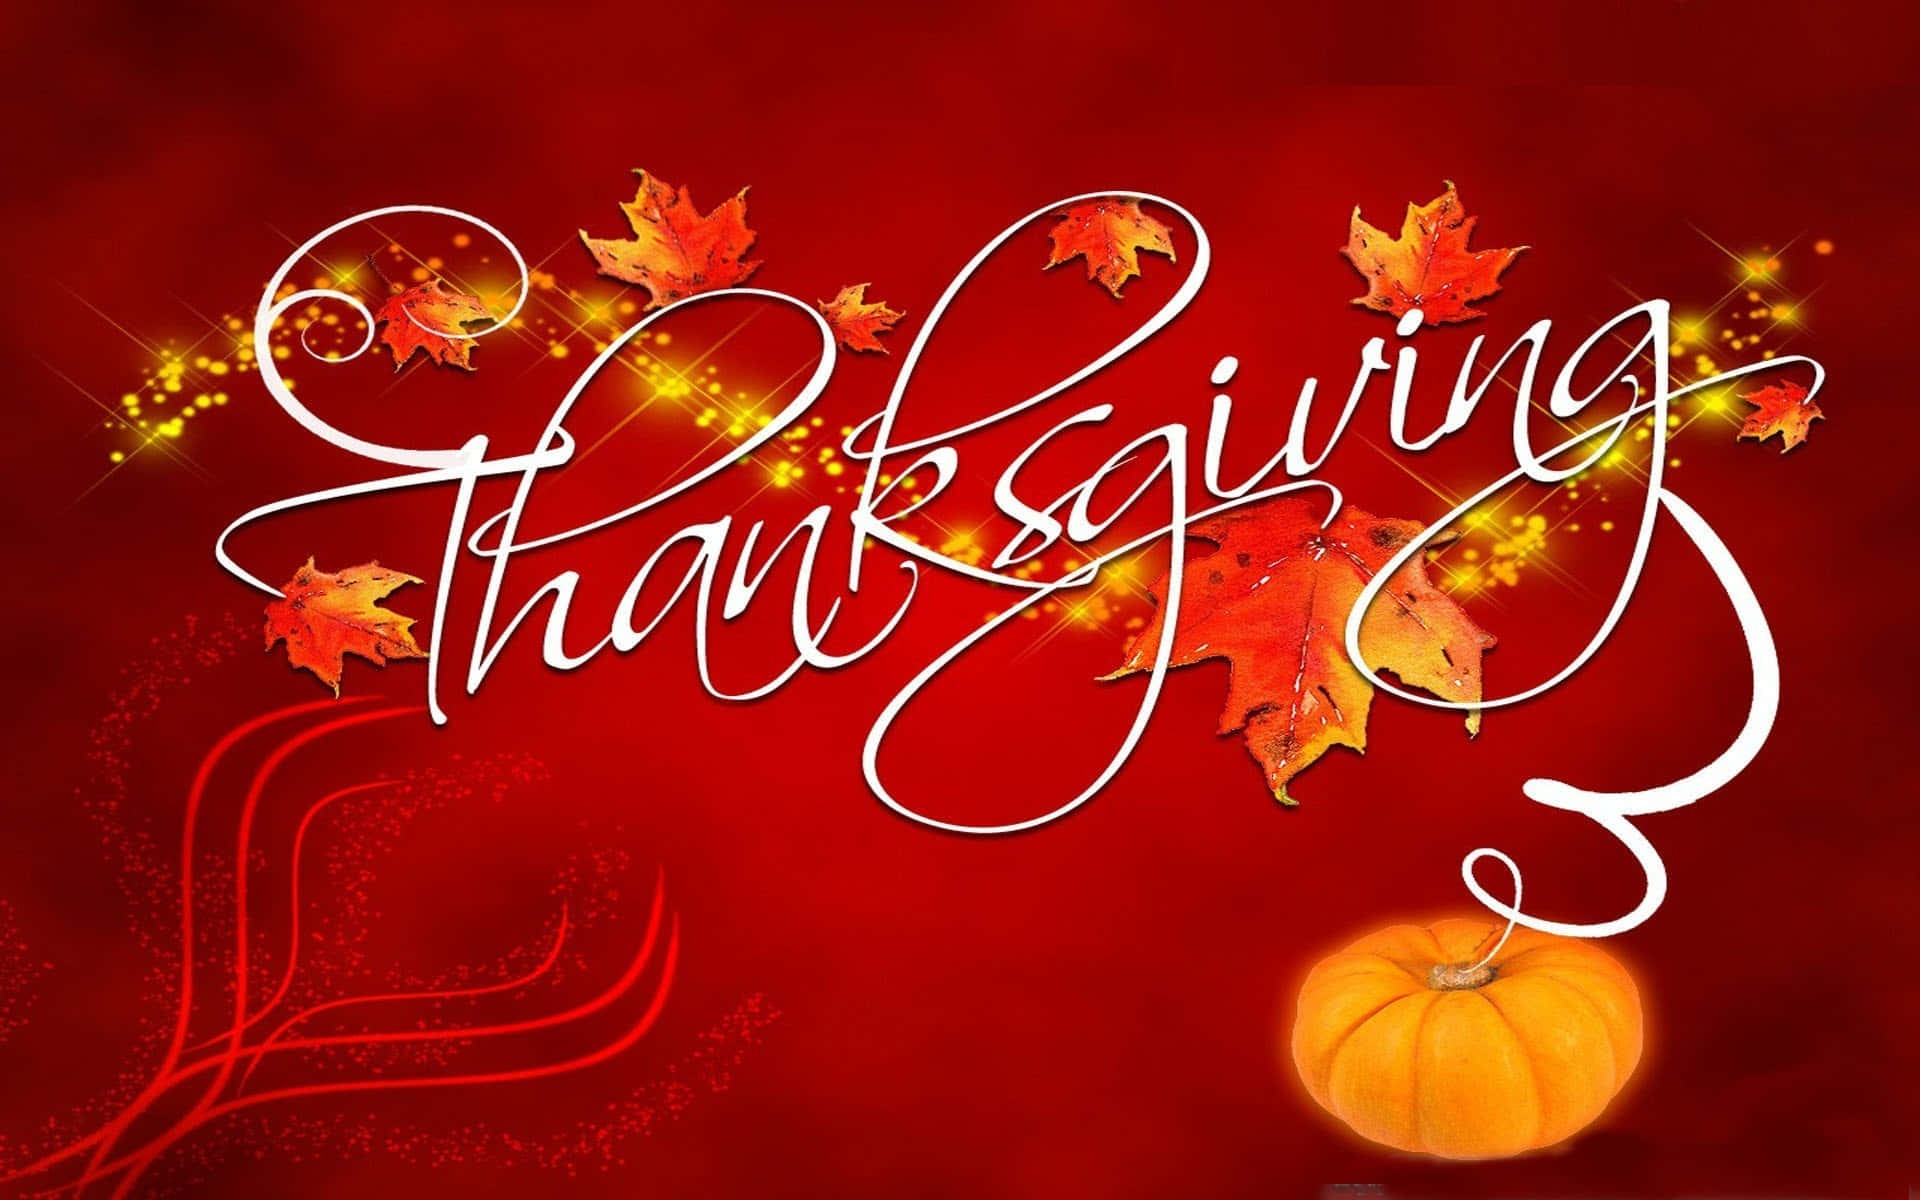 Celebrate the most beautiful Thanksgiving with your loved ones. Wallpaper